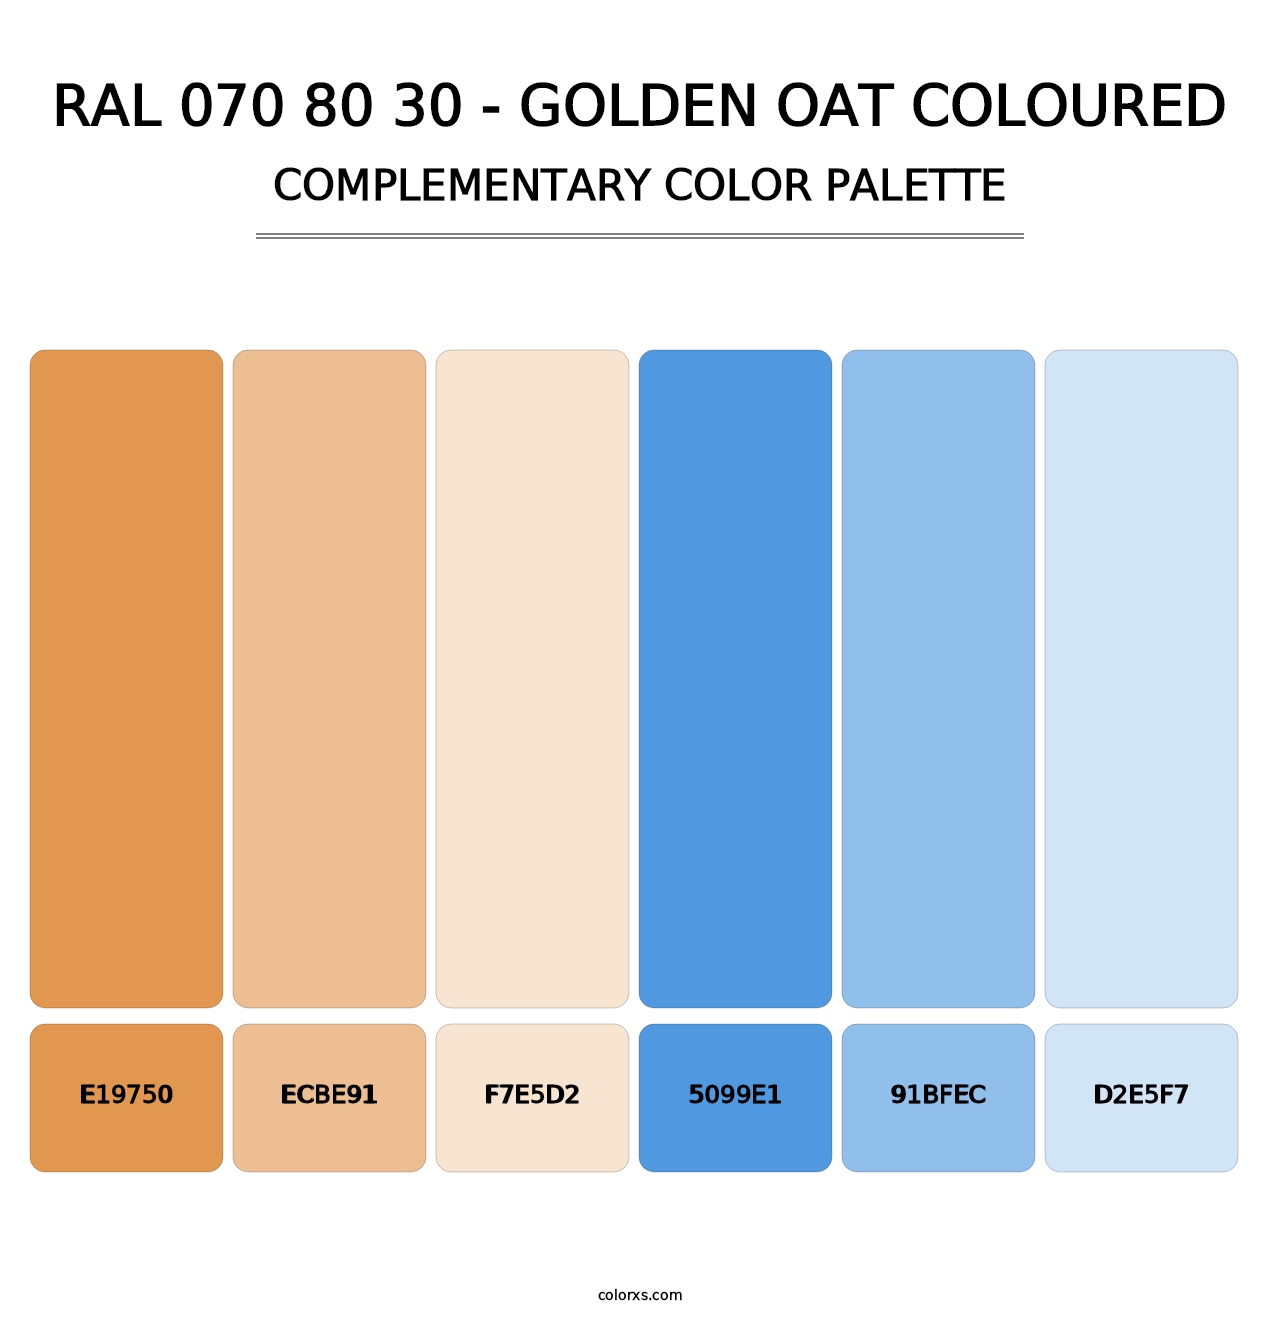 RAL 070 80 30 - Golden Oat Coloured - Complementary Color Palette